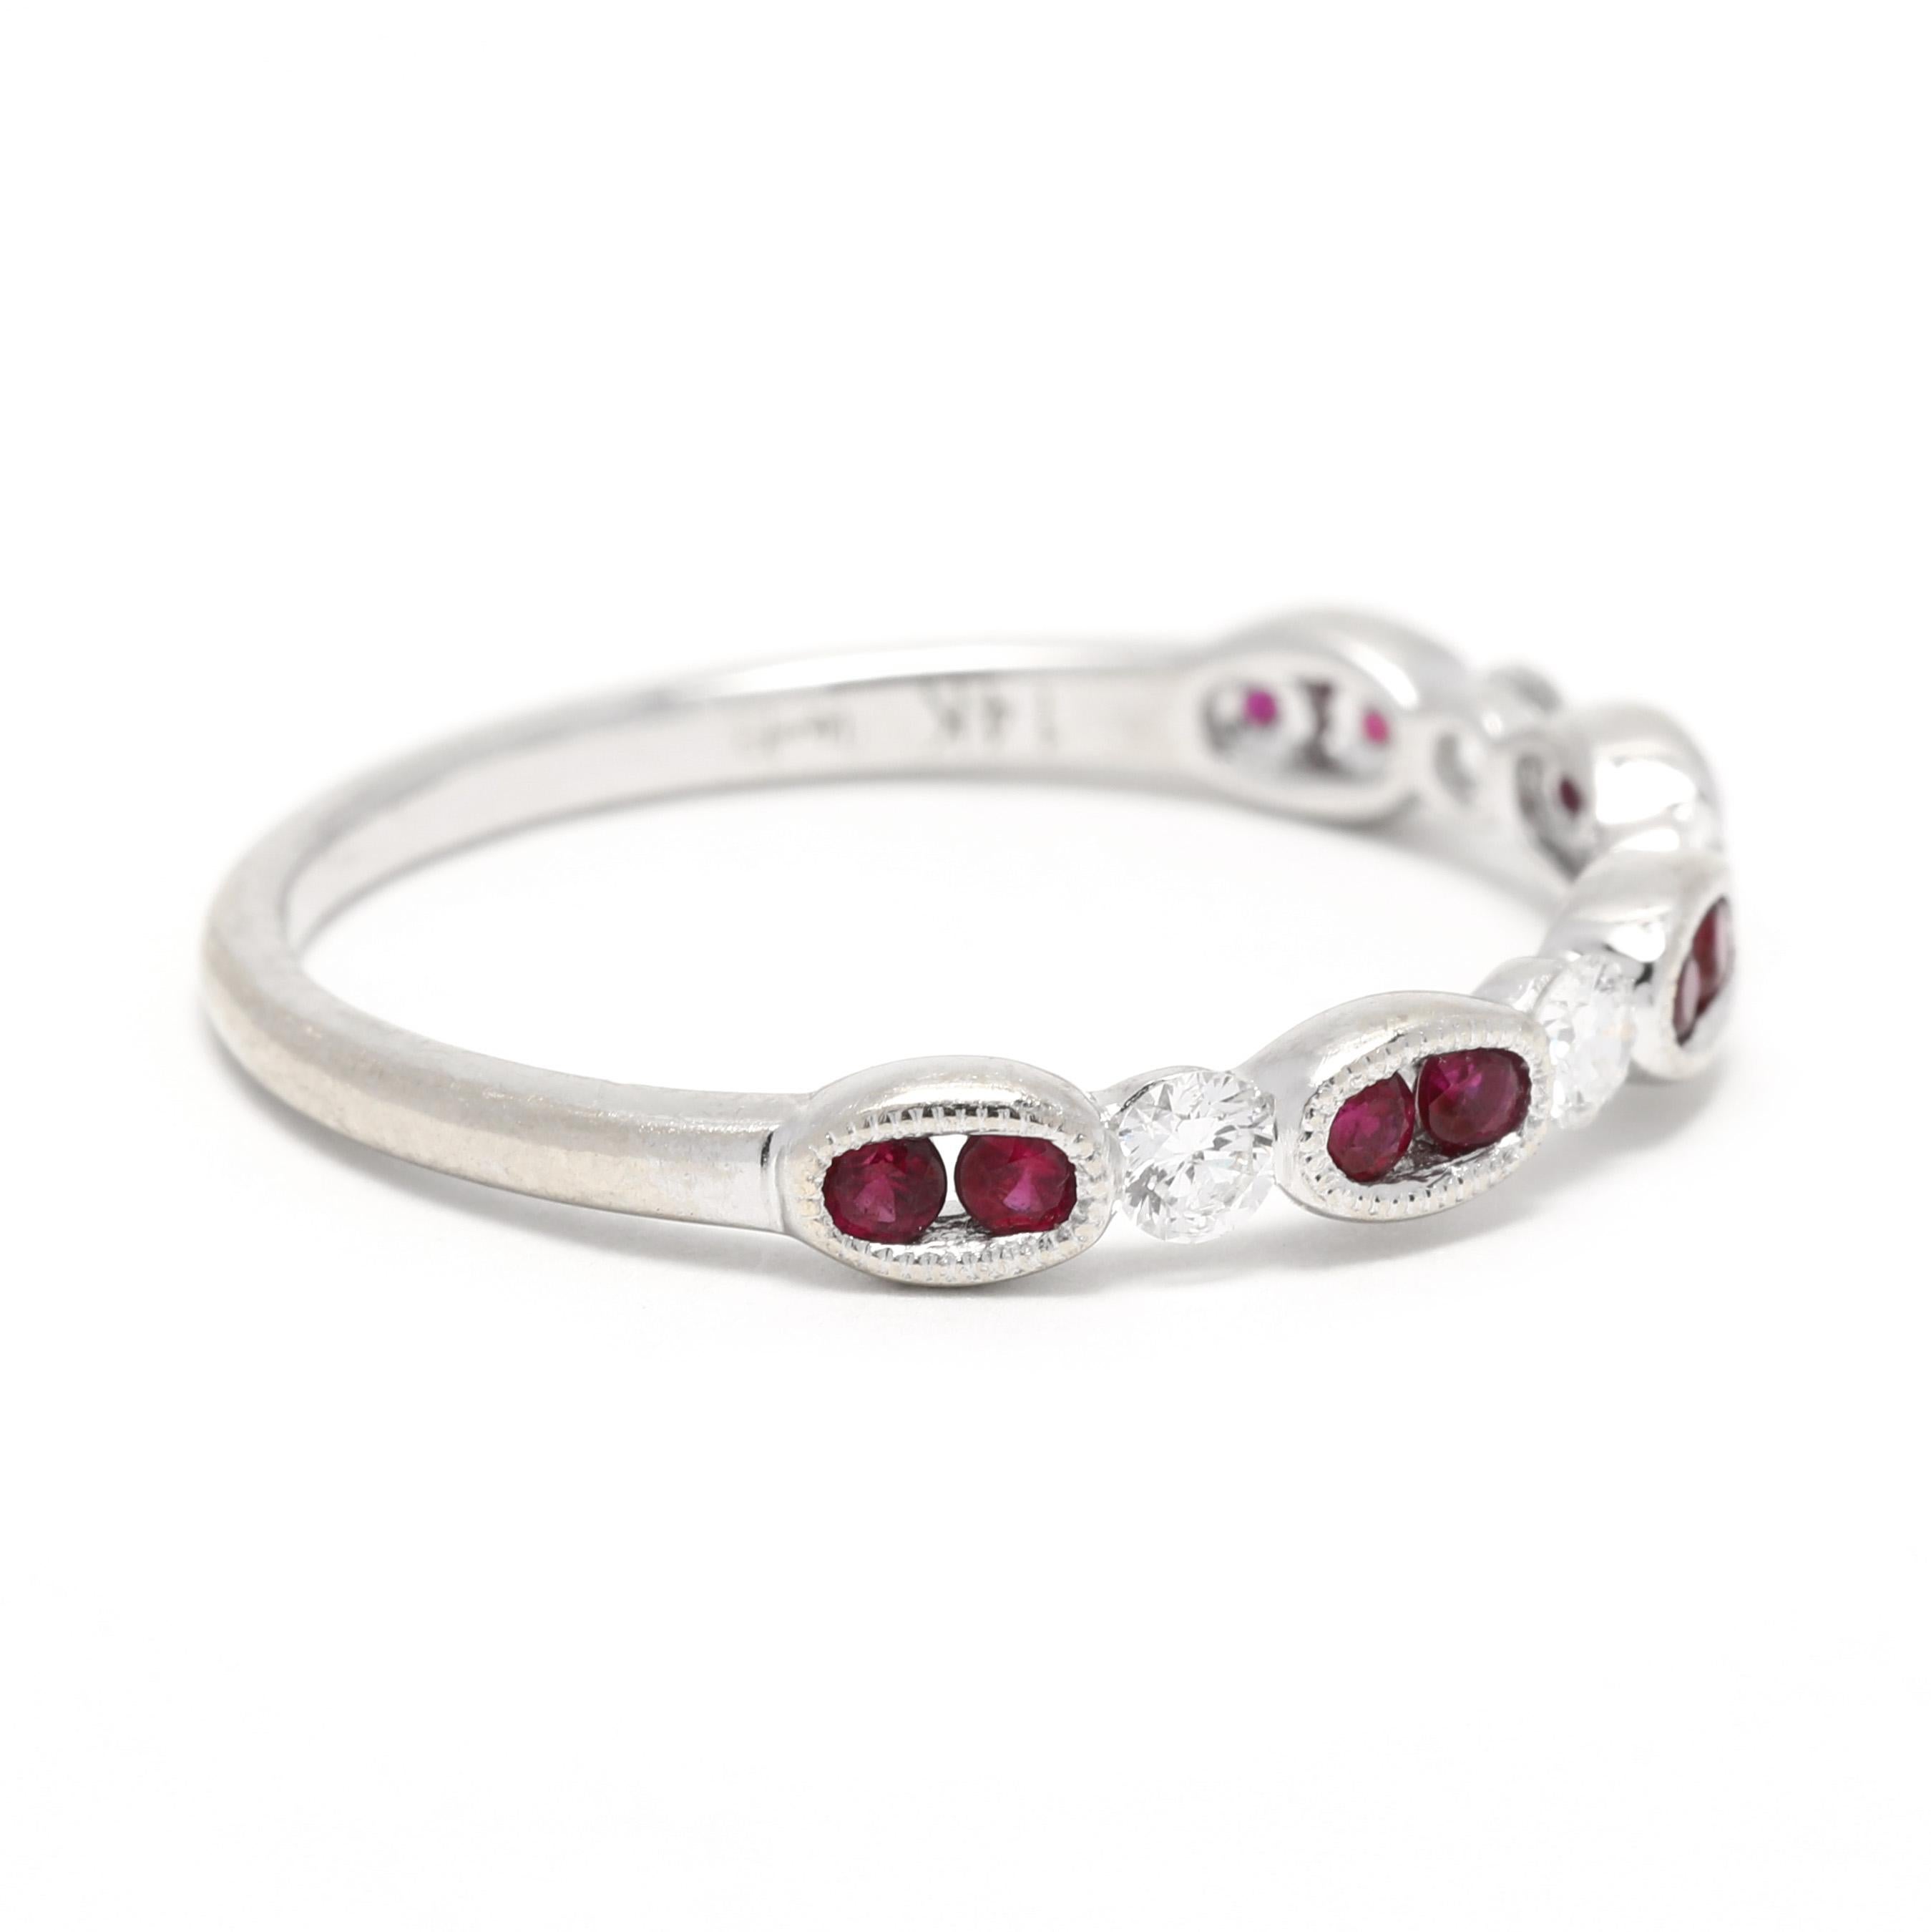 This elegant 0.35ctw Uneek ruby diamond stackable wedding band will make a perfect addition to your special day. Crafted in 14k white gold, this delicate, fancy thin diamond band features a sparkling array of rubies and diamonds, with an approximate